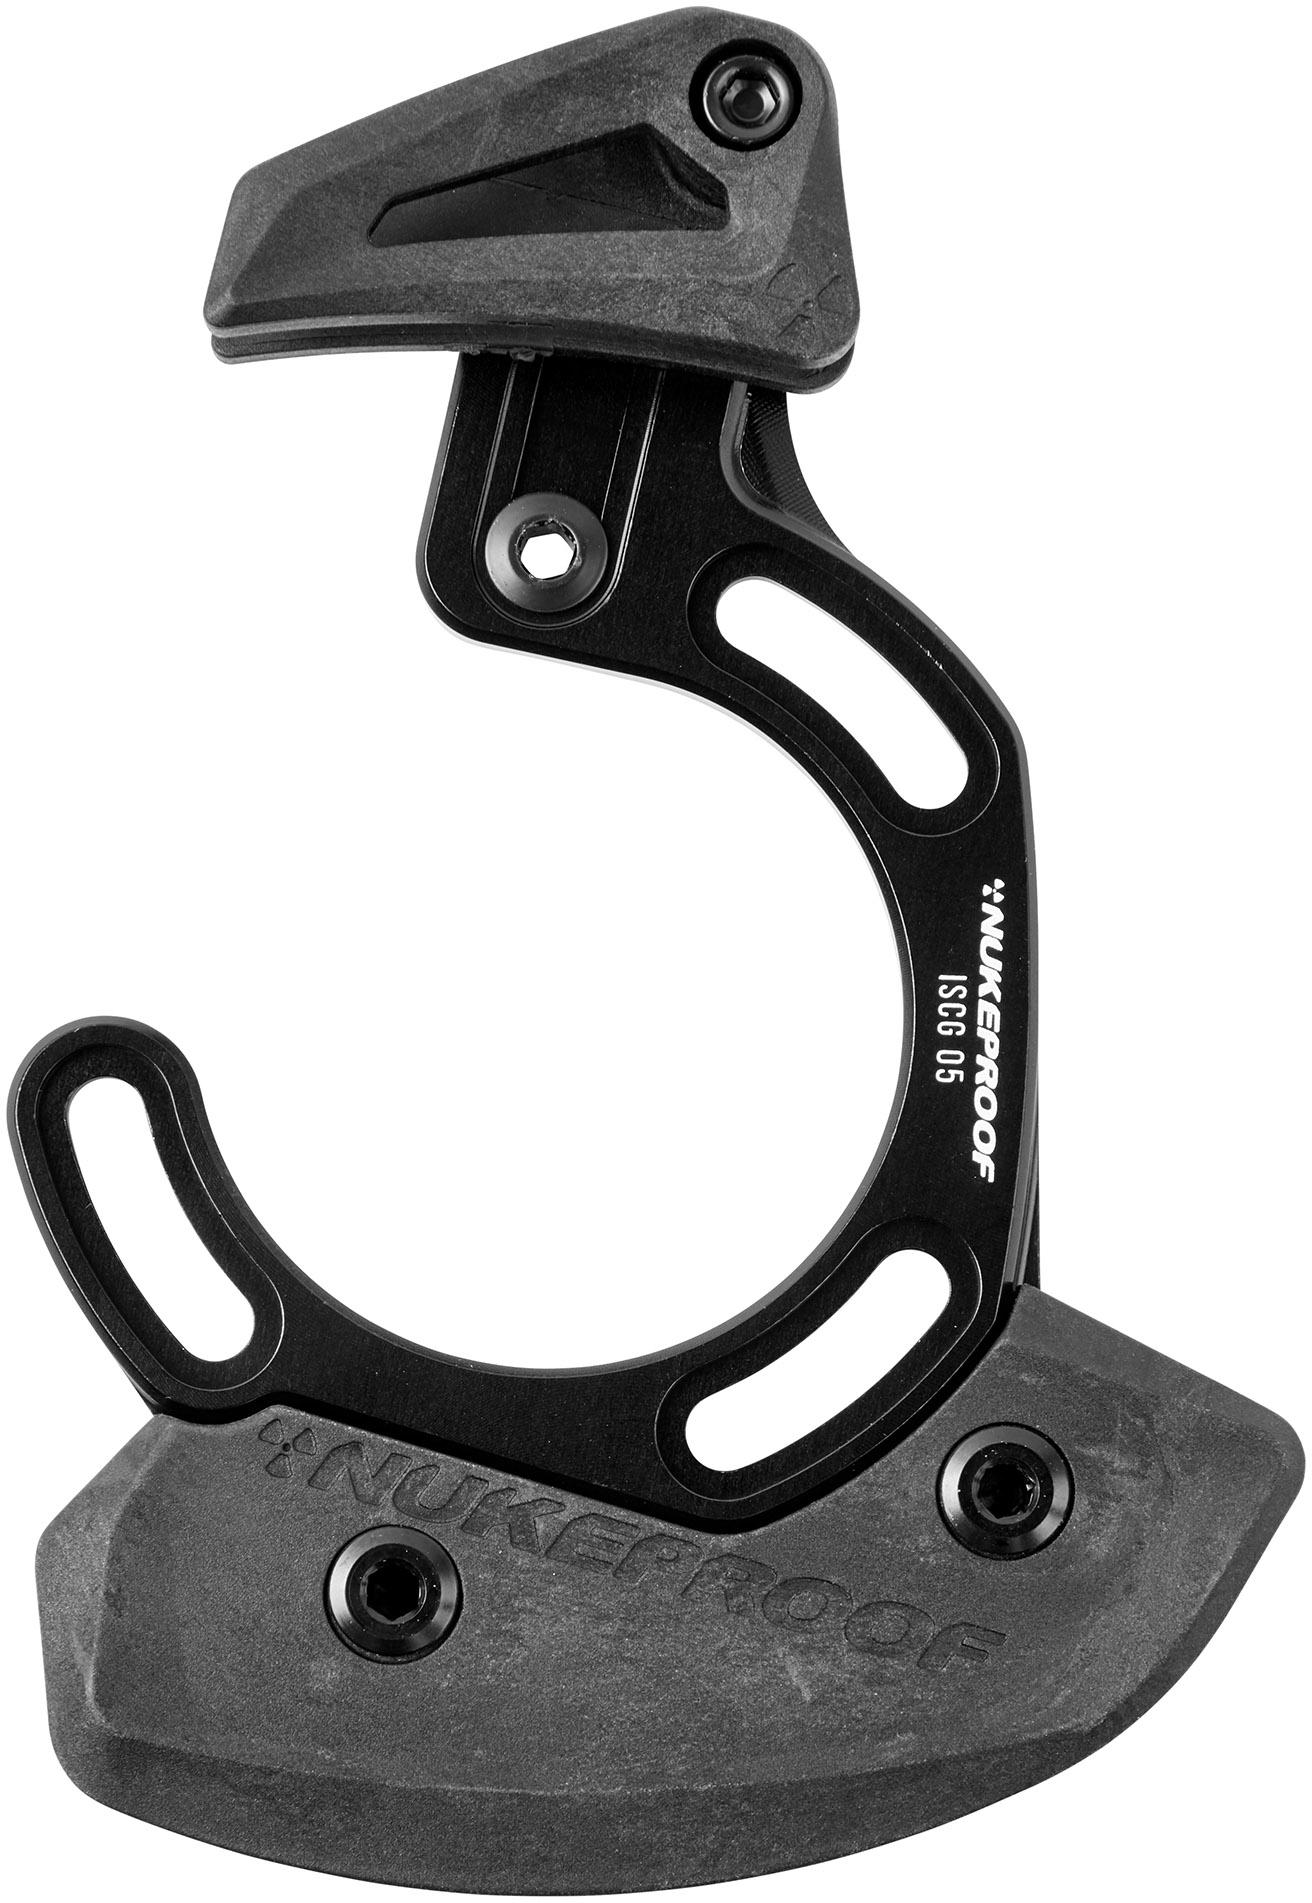 Nukeproof Chain Guide Iscg 05 Top Guide With Bash - Black/black